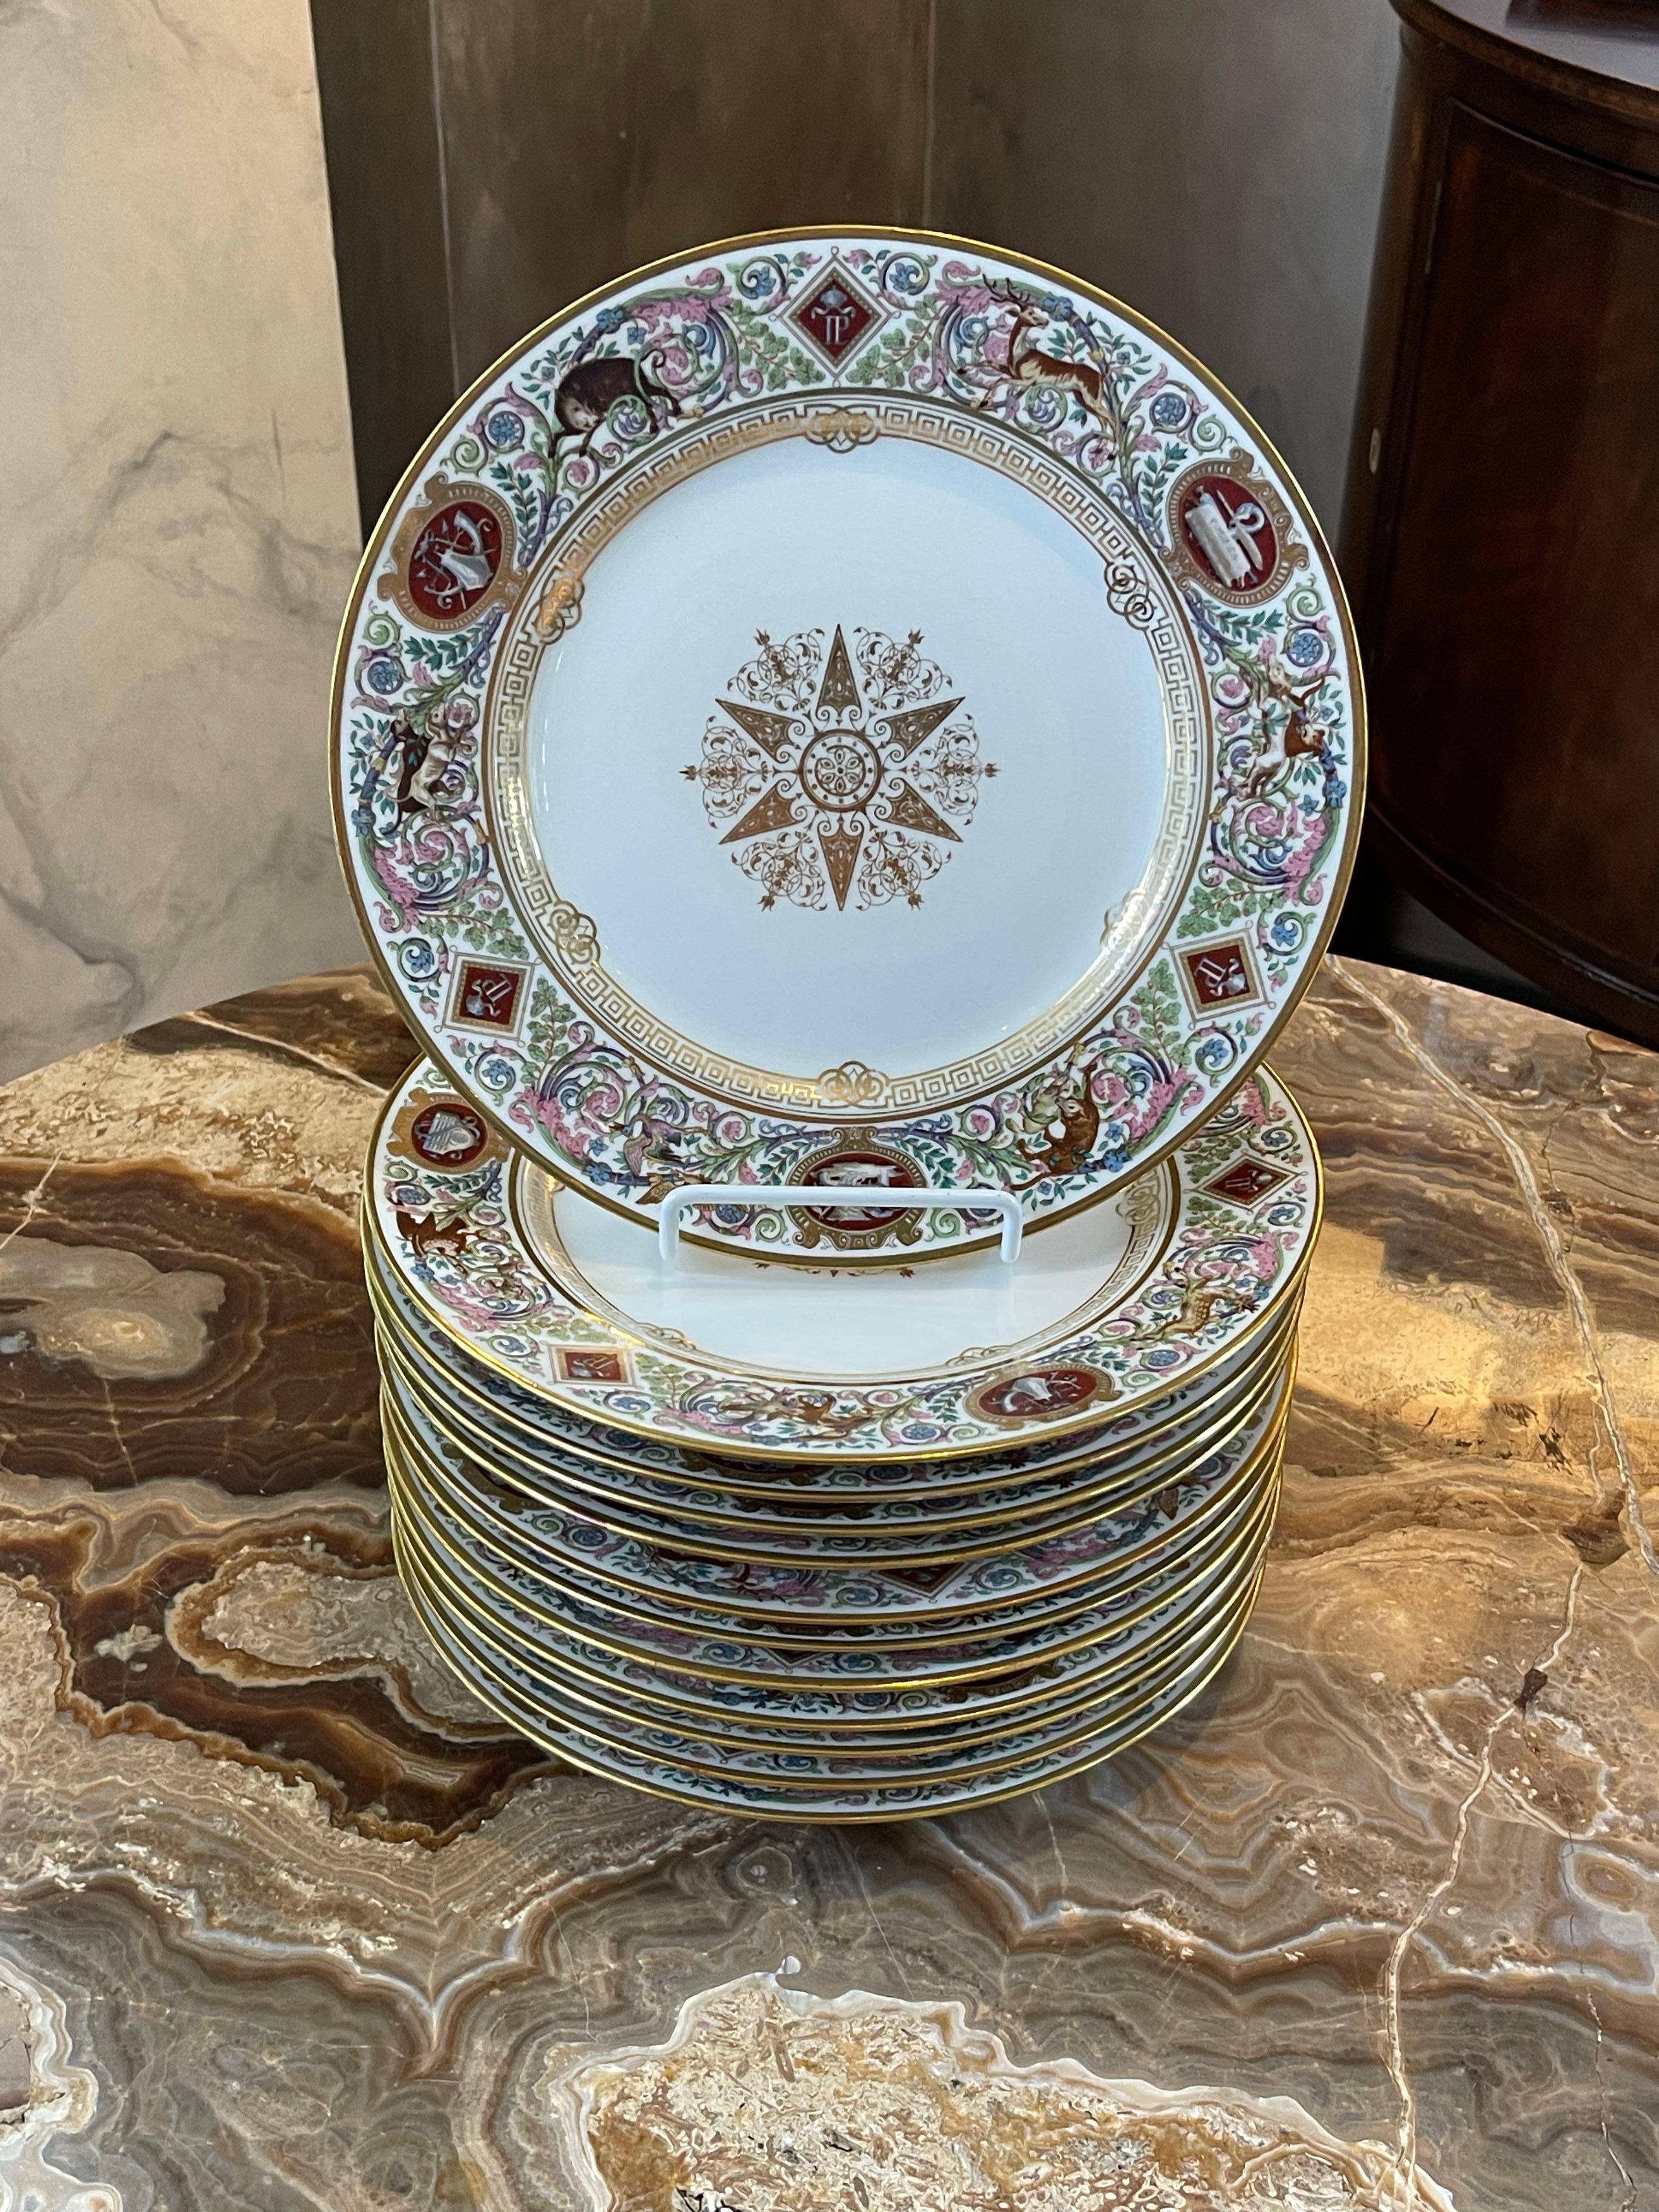 A set of 12 Sèvres Louis-Philippe hunting pattern dinner plates, that he had produced for Chateau de Fontainebleau. The broad border depicts hand colored hunting scenes of wild boar, squirrel, deer, and dogs amongst elaborately decorated oak